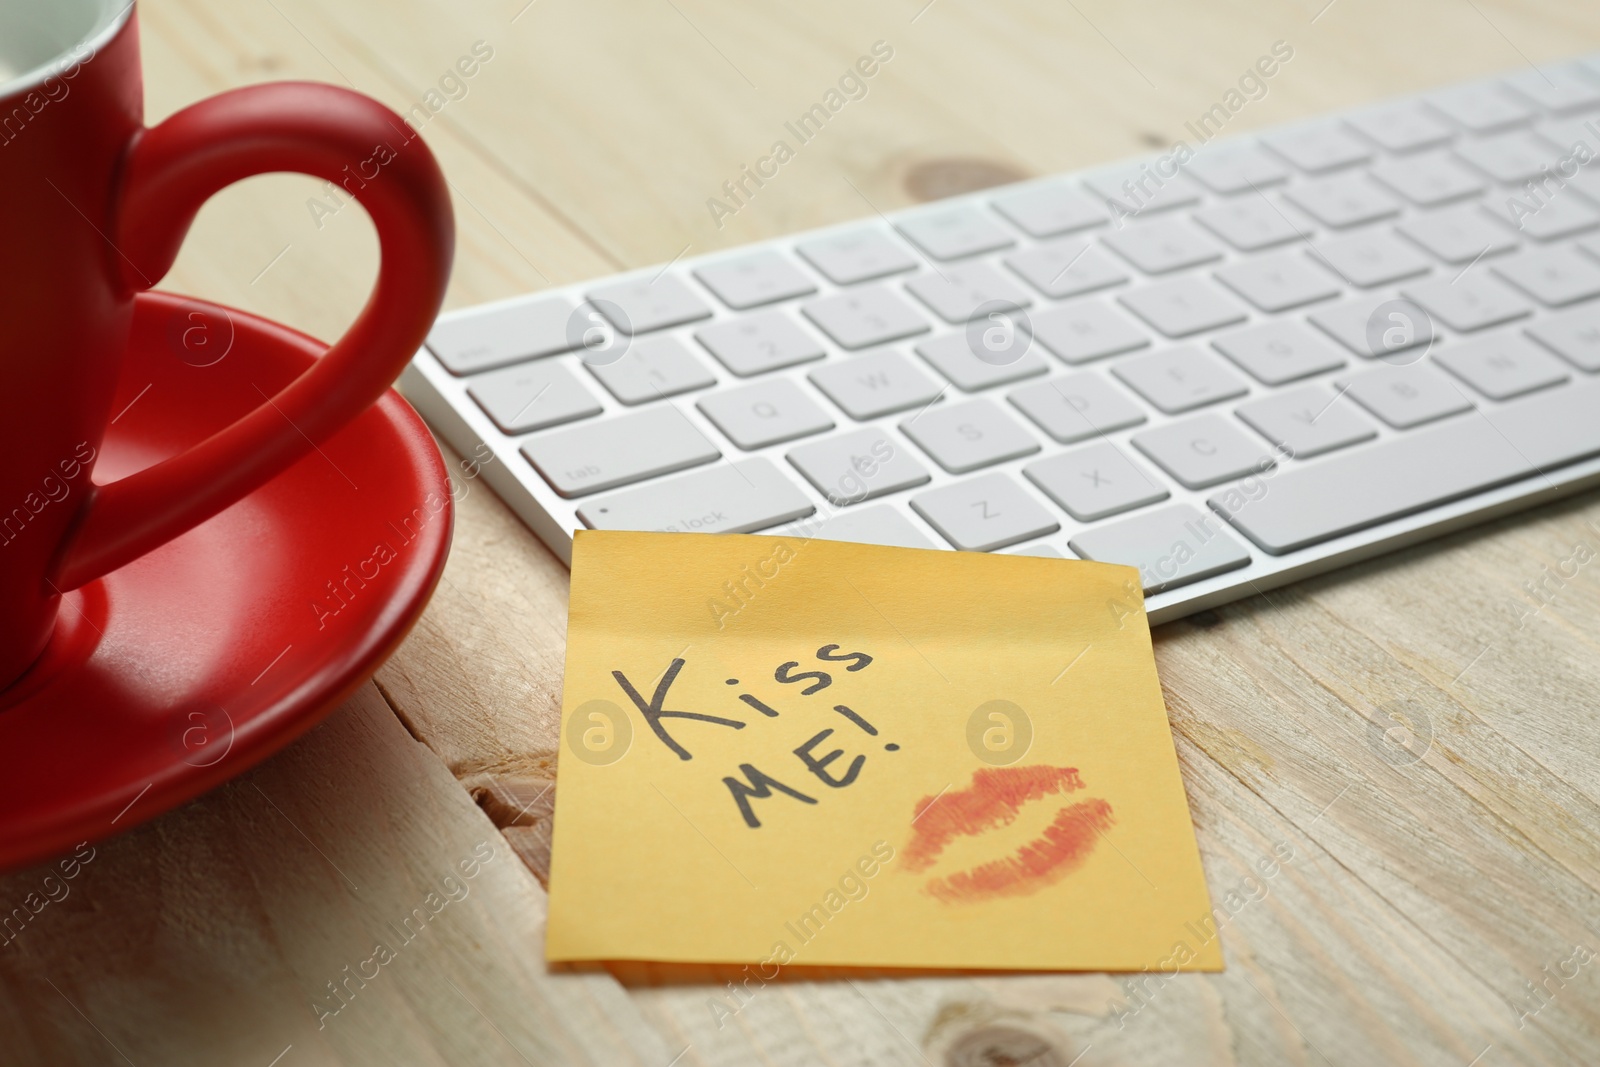 Photo of Sticky note with phrase Kiss Me, lipstick mark, cup of coffee and keyboard on wooden table, closeup